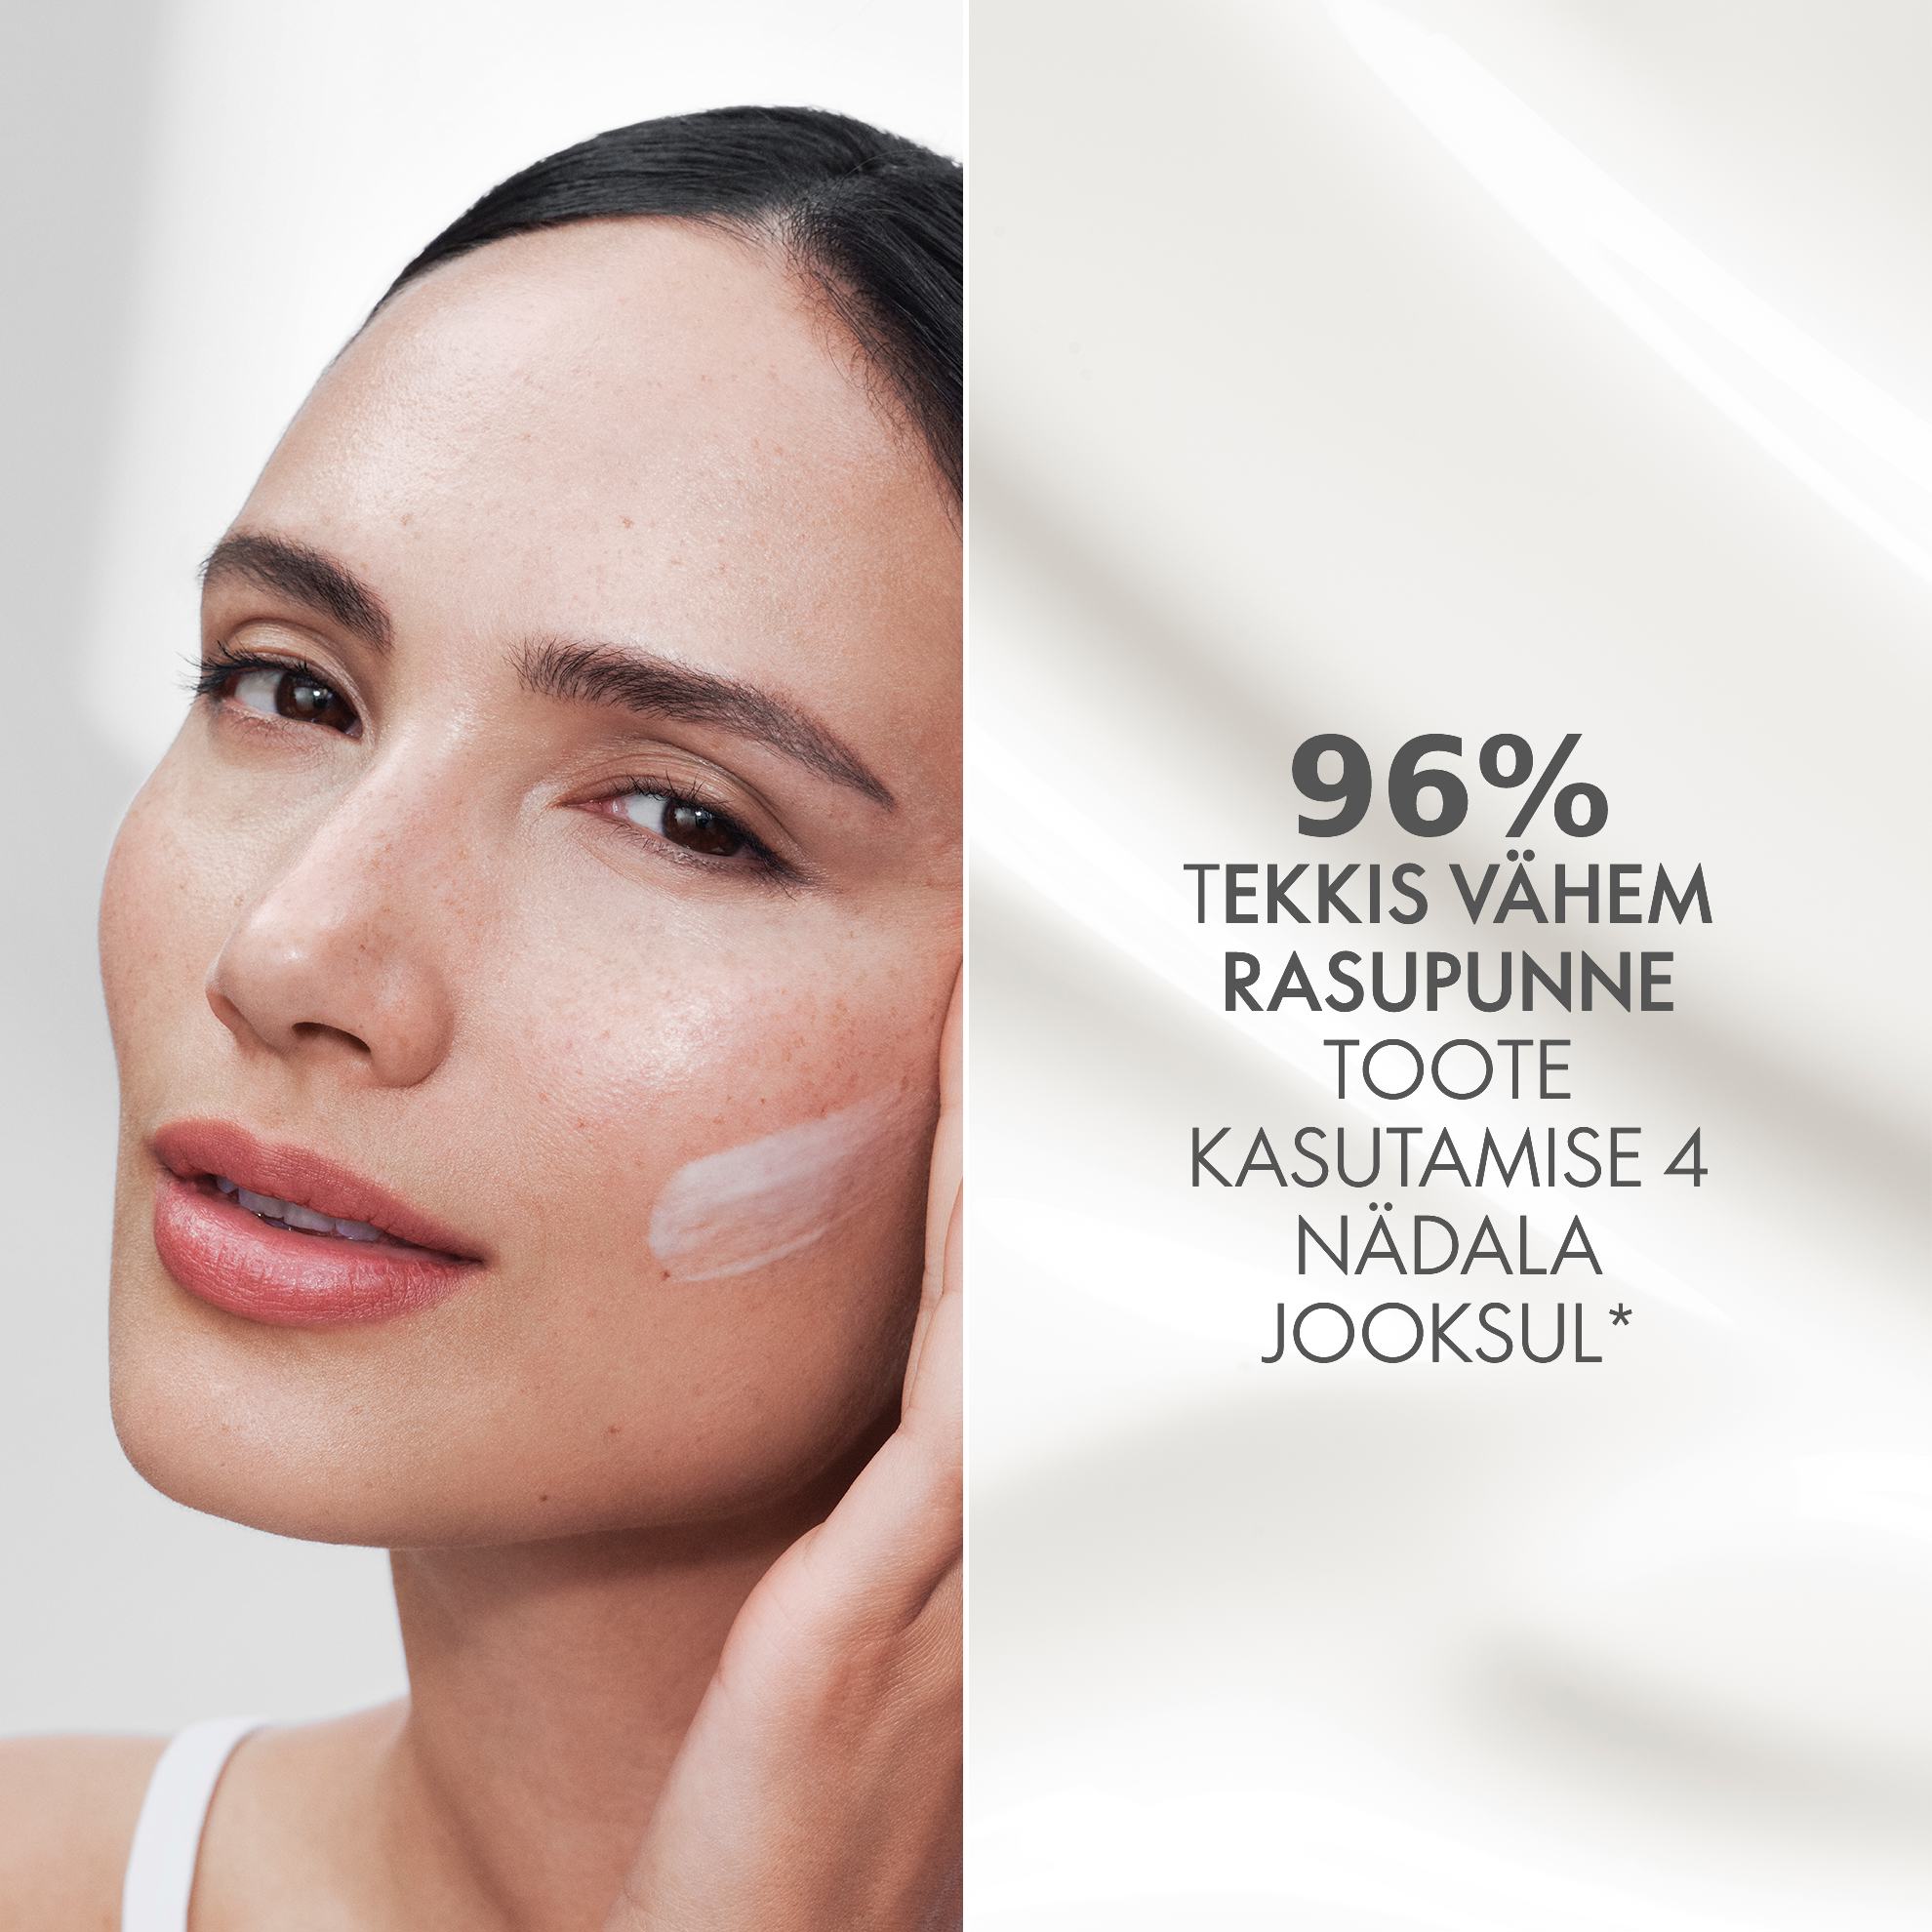 https://media-cdn.oriflame.com/productImage?externalMediaId=product-management-media%2fProducts%2f41039%2fEE%2f41039_2.png&id=17585990&version=1